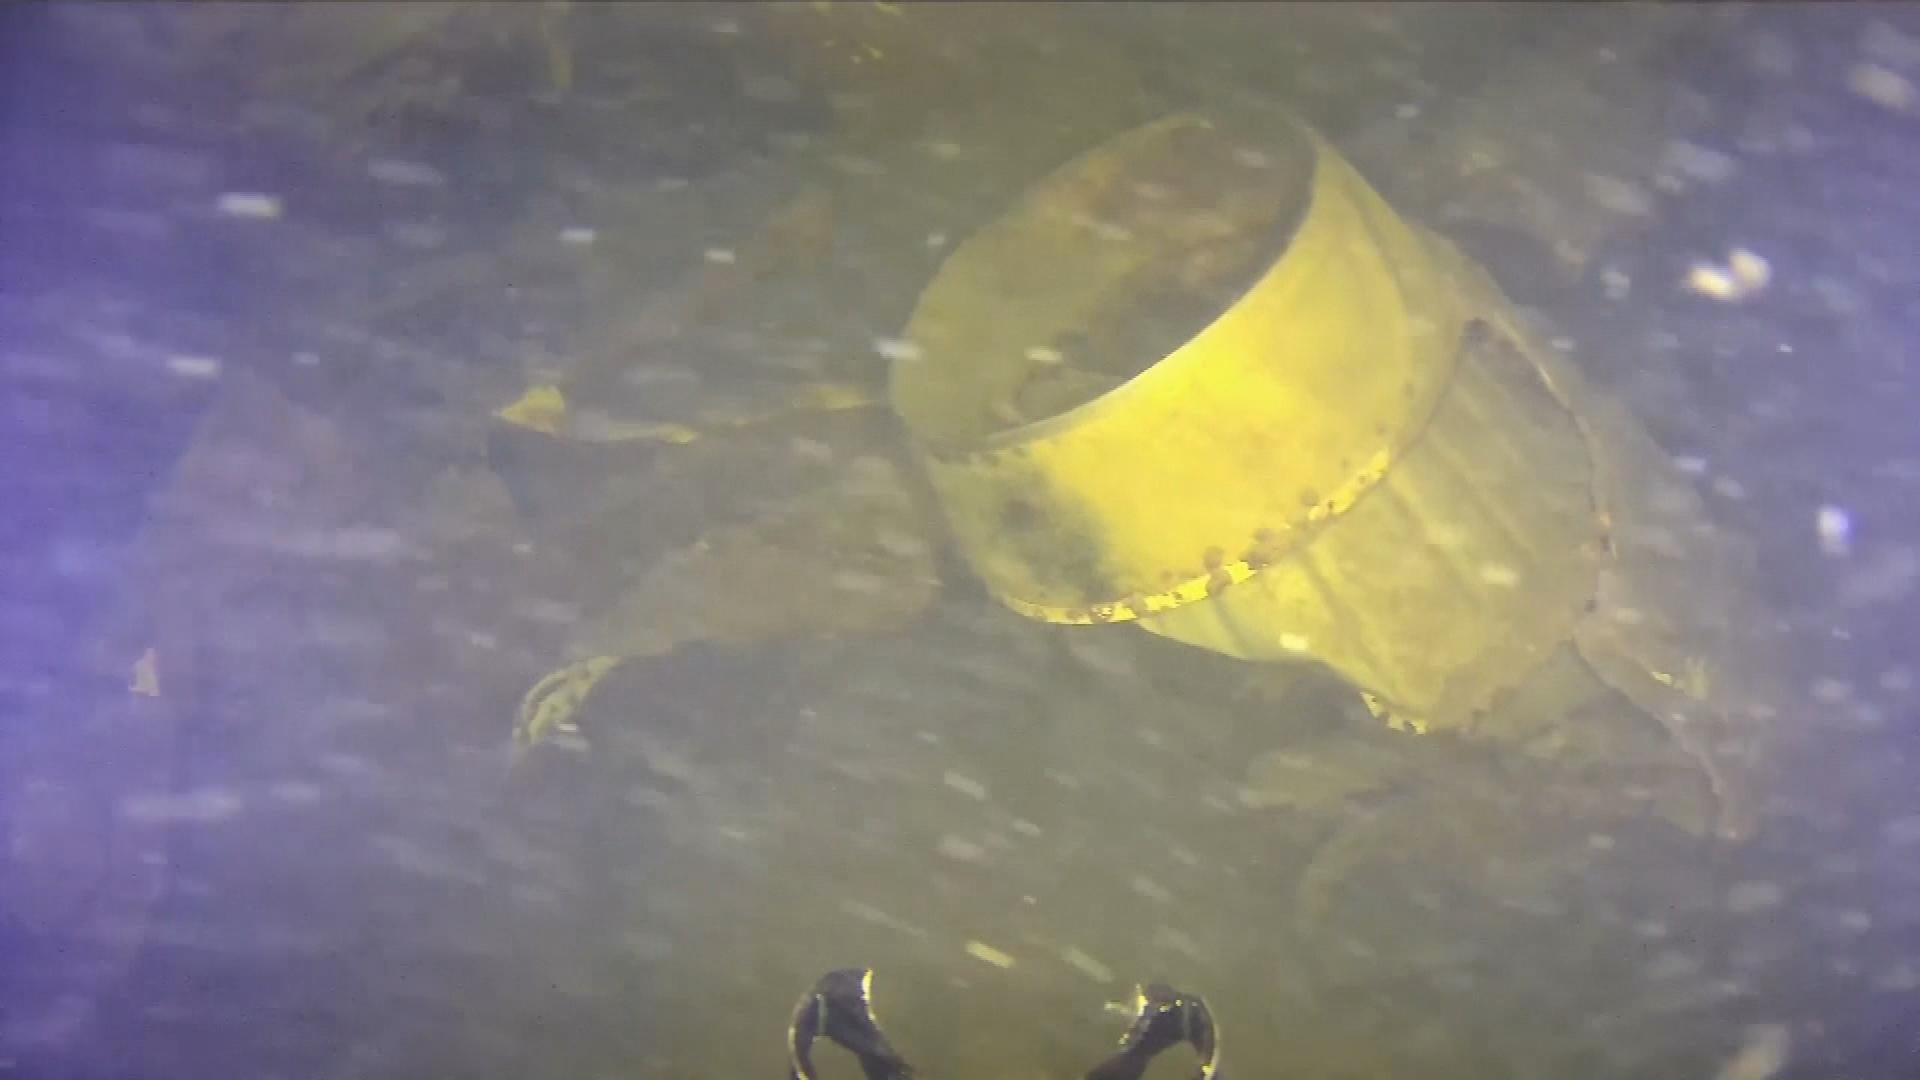 The wreckage of a plane that went down 53 years ago was found in Lake Champlain.